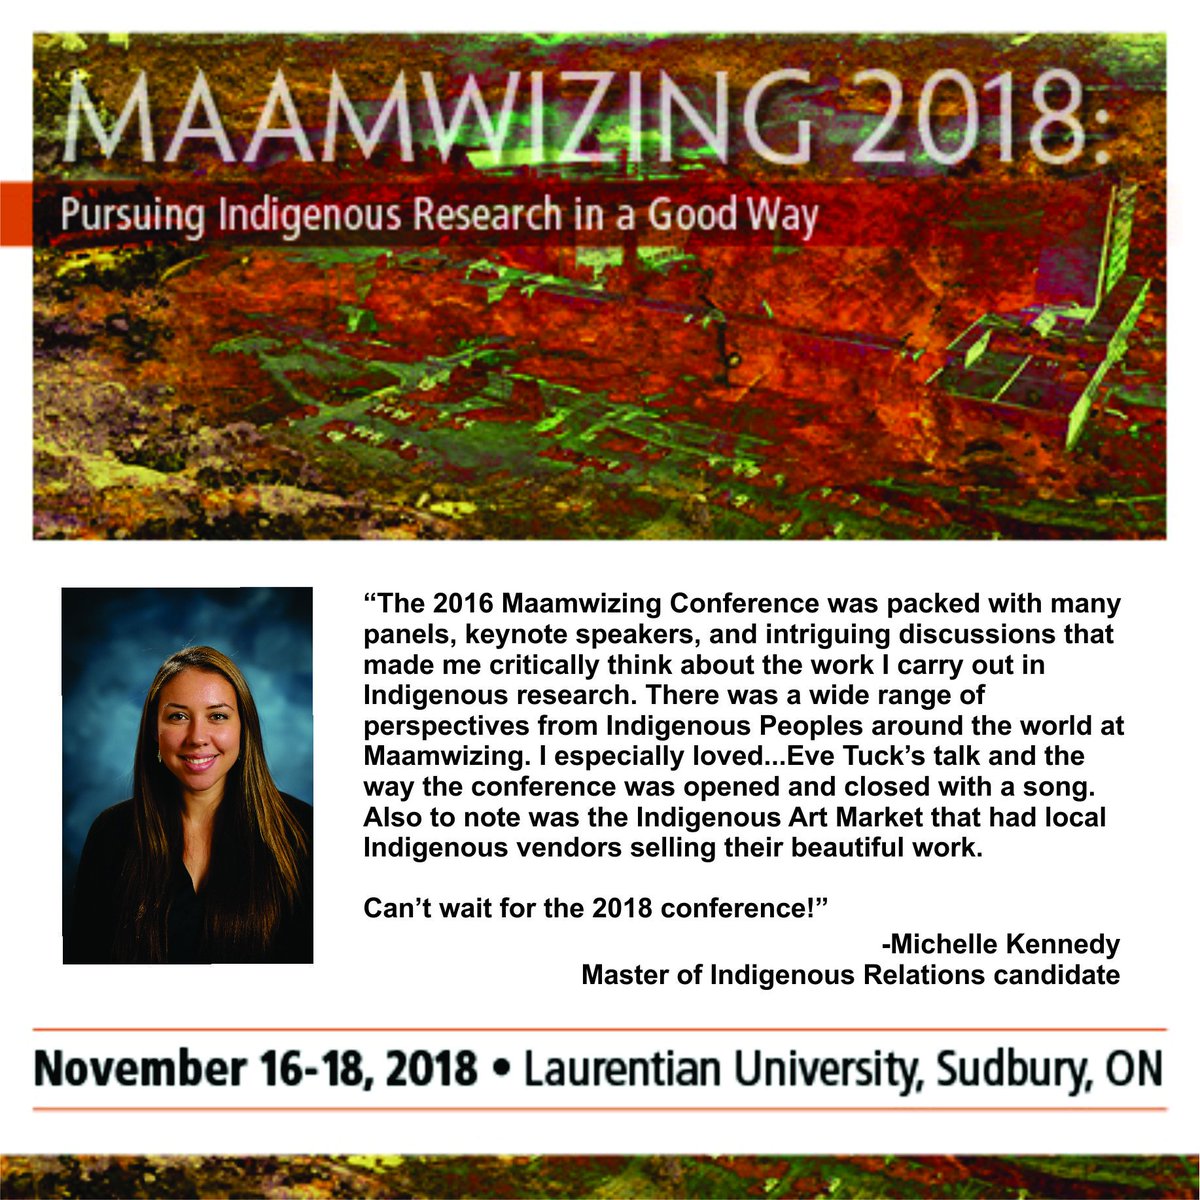 Less than 2 weeks until registration closes! Michelle Kennedy shares how the conference helped her with her #indigenousresearch! Register here: laurentian.ca/faculty/arts/i… #indigenousconference #Maamwizing2018 #TestimonialTuesday